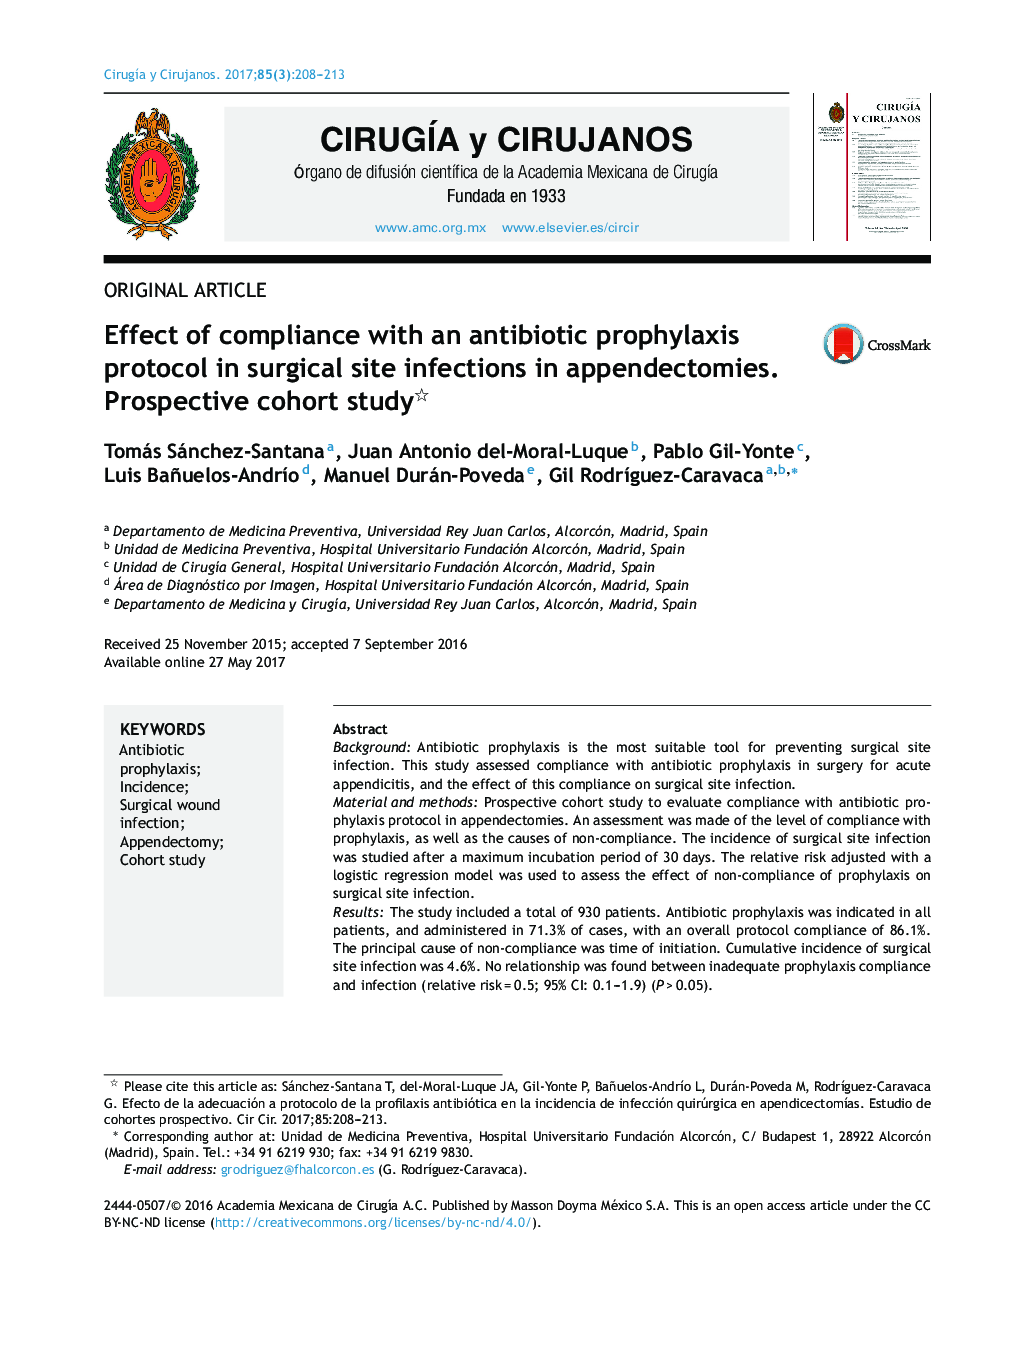 Effect of compliance with an antibiotic prophylaxis protocol in surgical site infections in appendectomies. Prospective cohort study